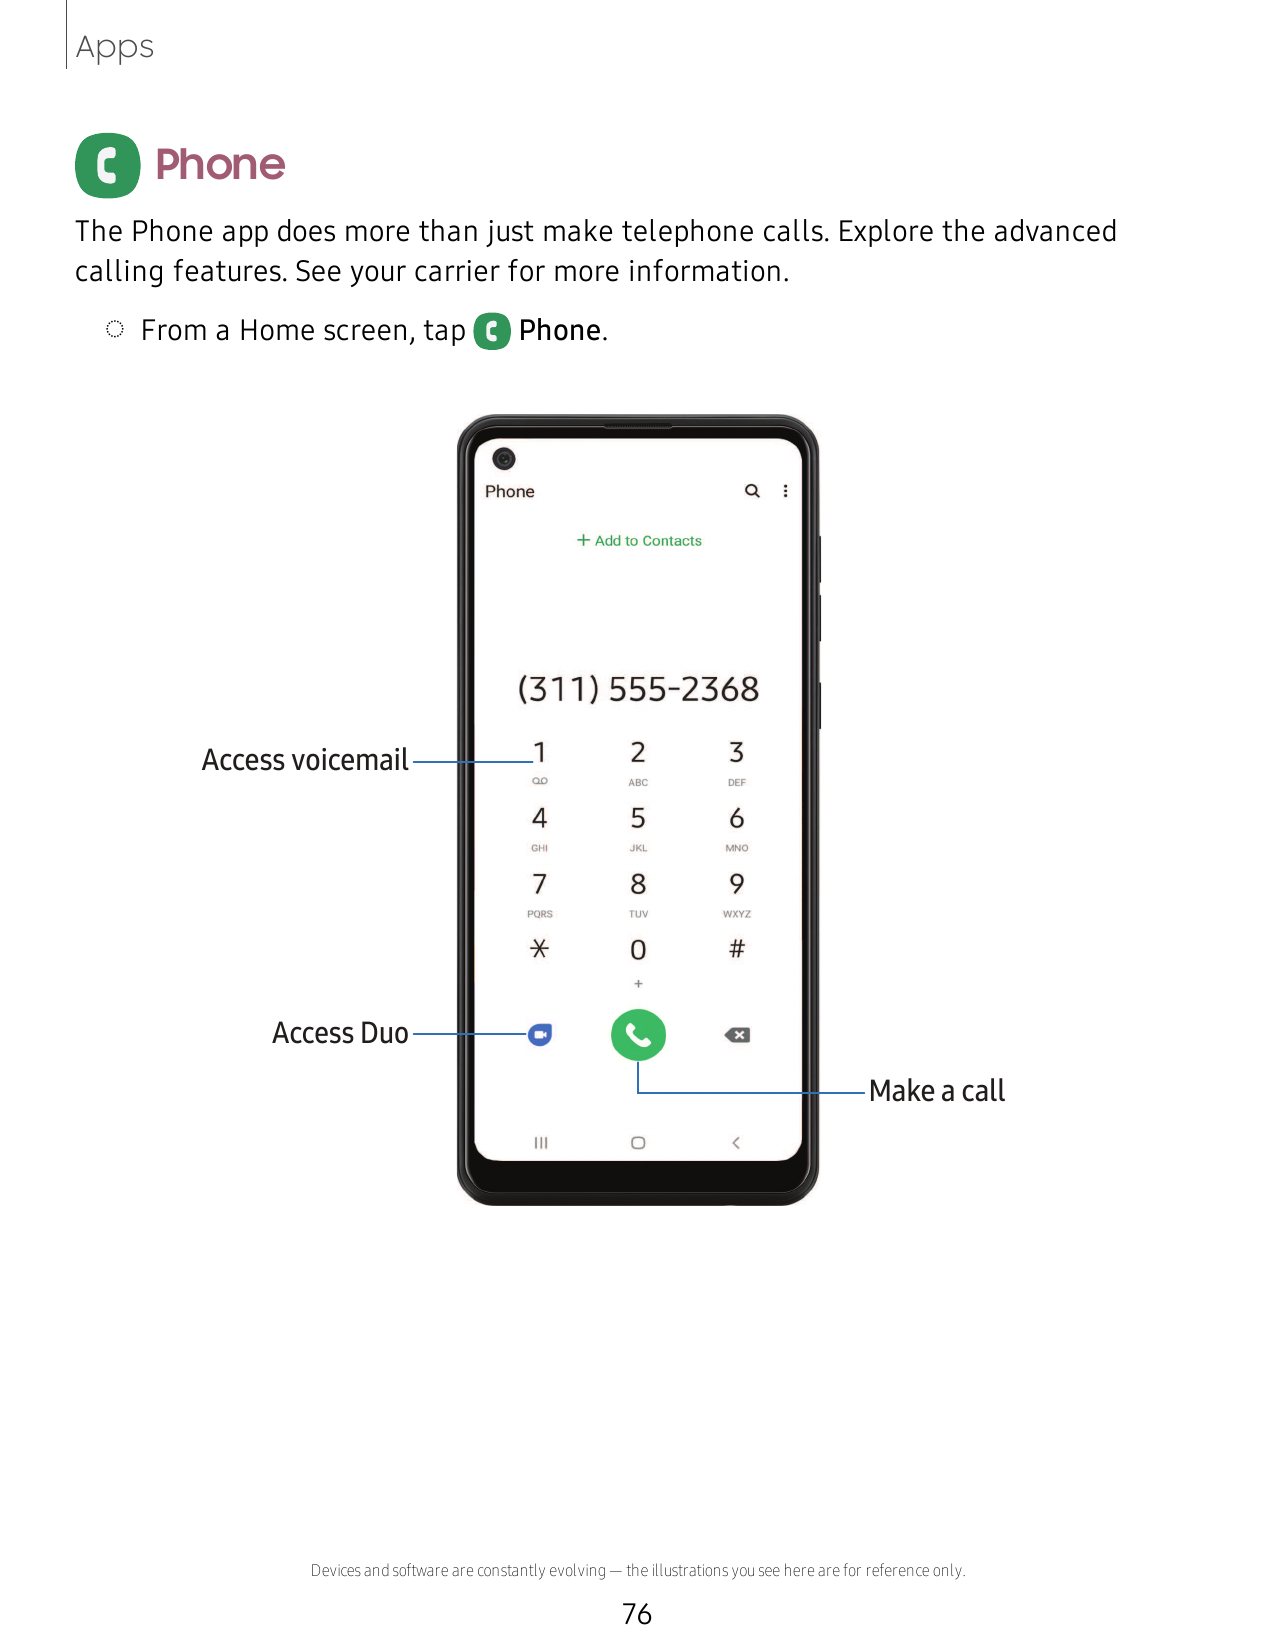 AppsPhoneThe Phone app does more than just make telephone calls. Explore the advancedcalling features. See your carrier for more